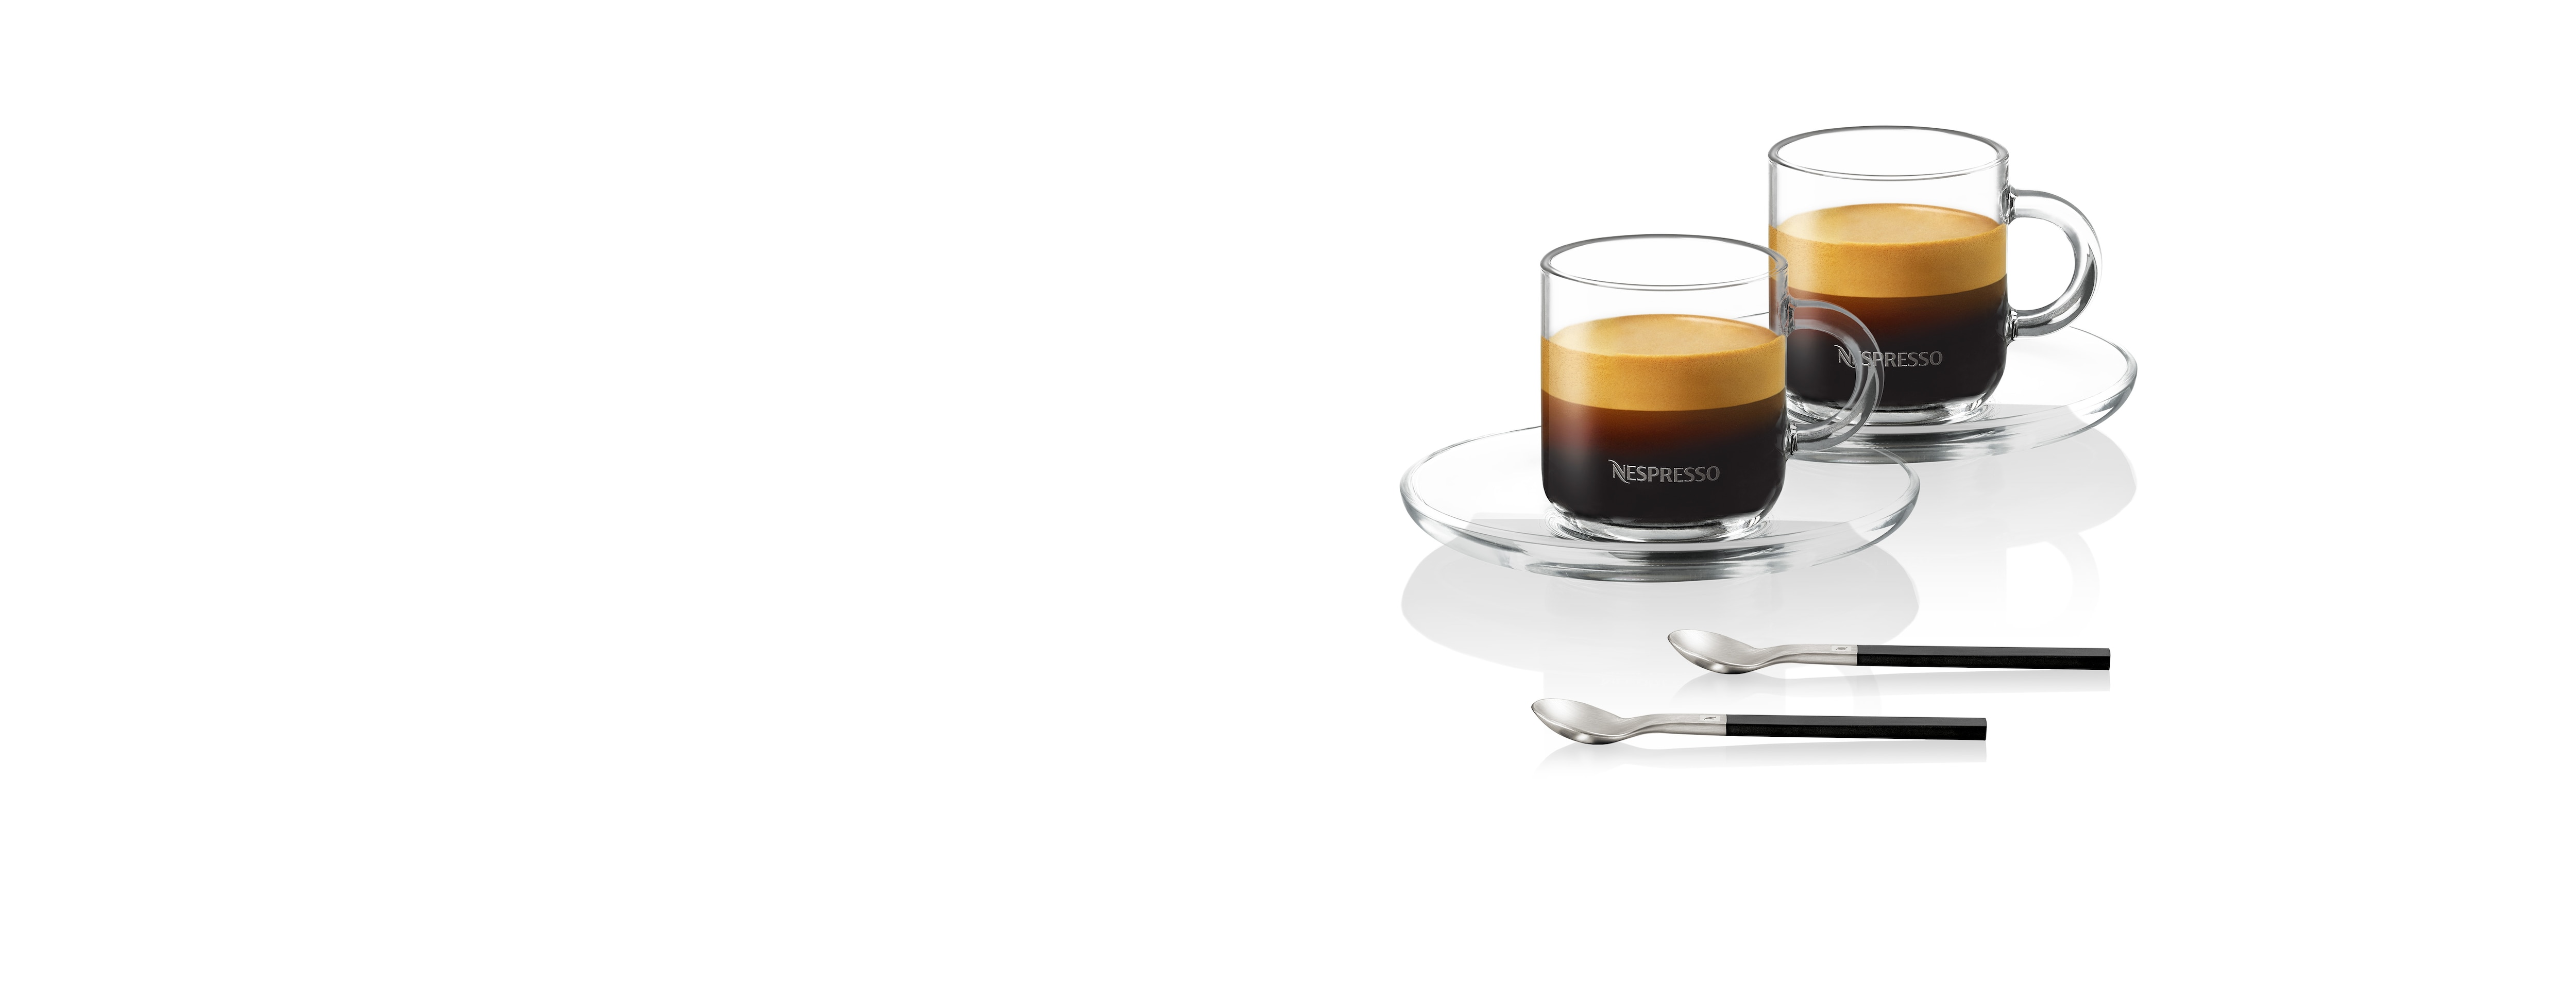 VERTUO Coffee Mugs with Spoons